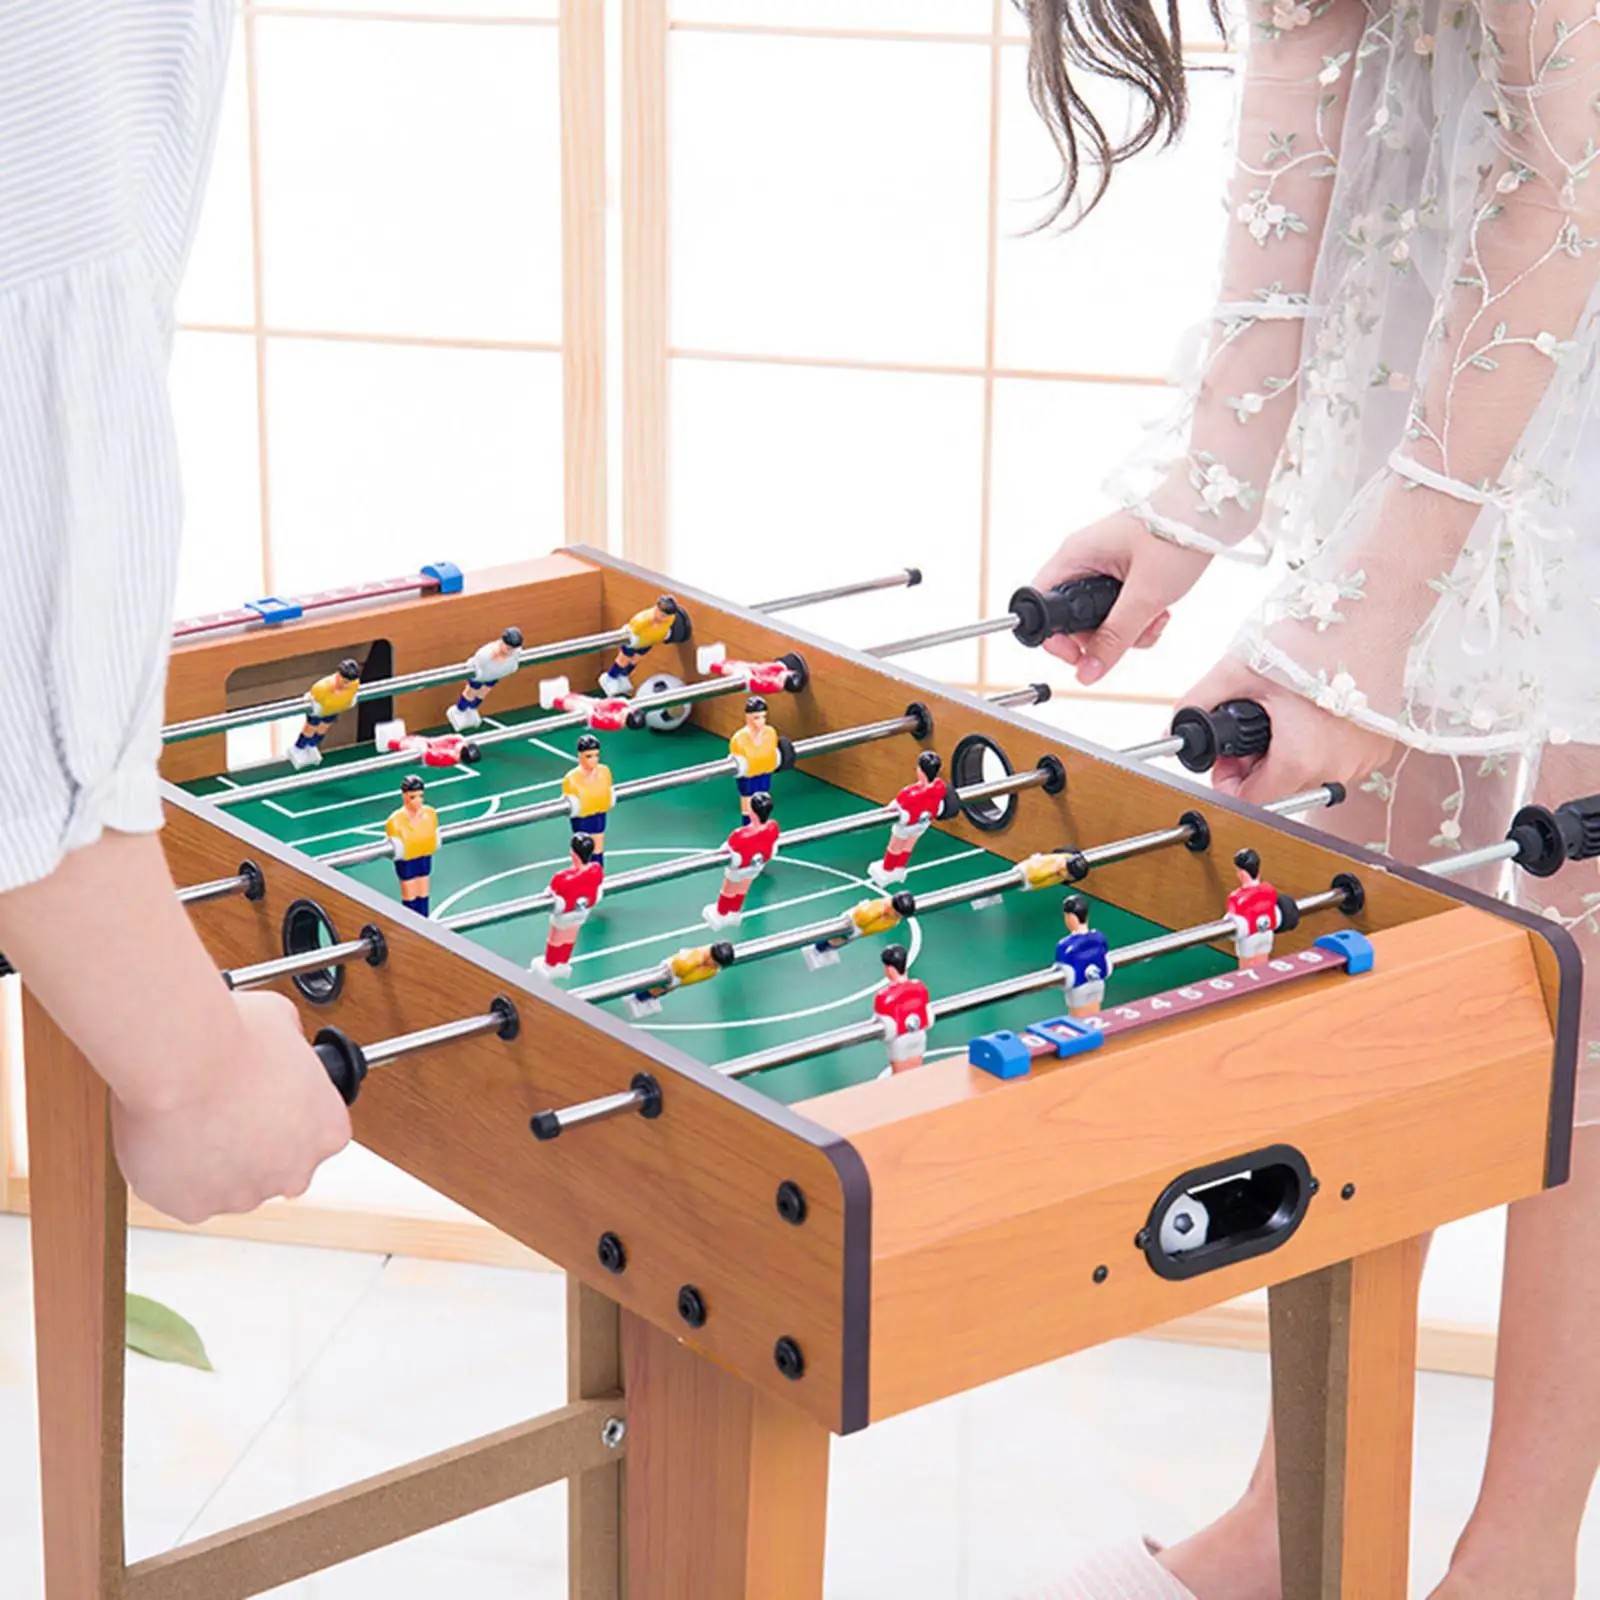 Wooden Foosball Table Tabletop Soccer Game Parent Child Interactive Toy with Ball Desktop Game for Indoor Family Party